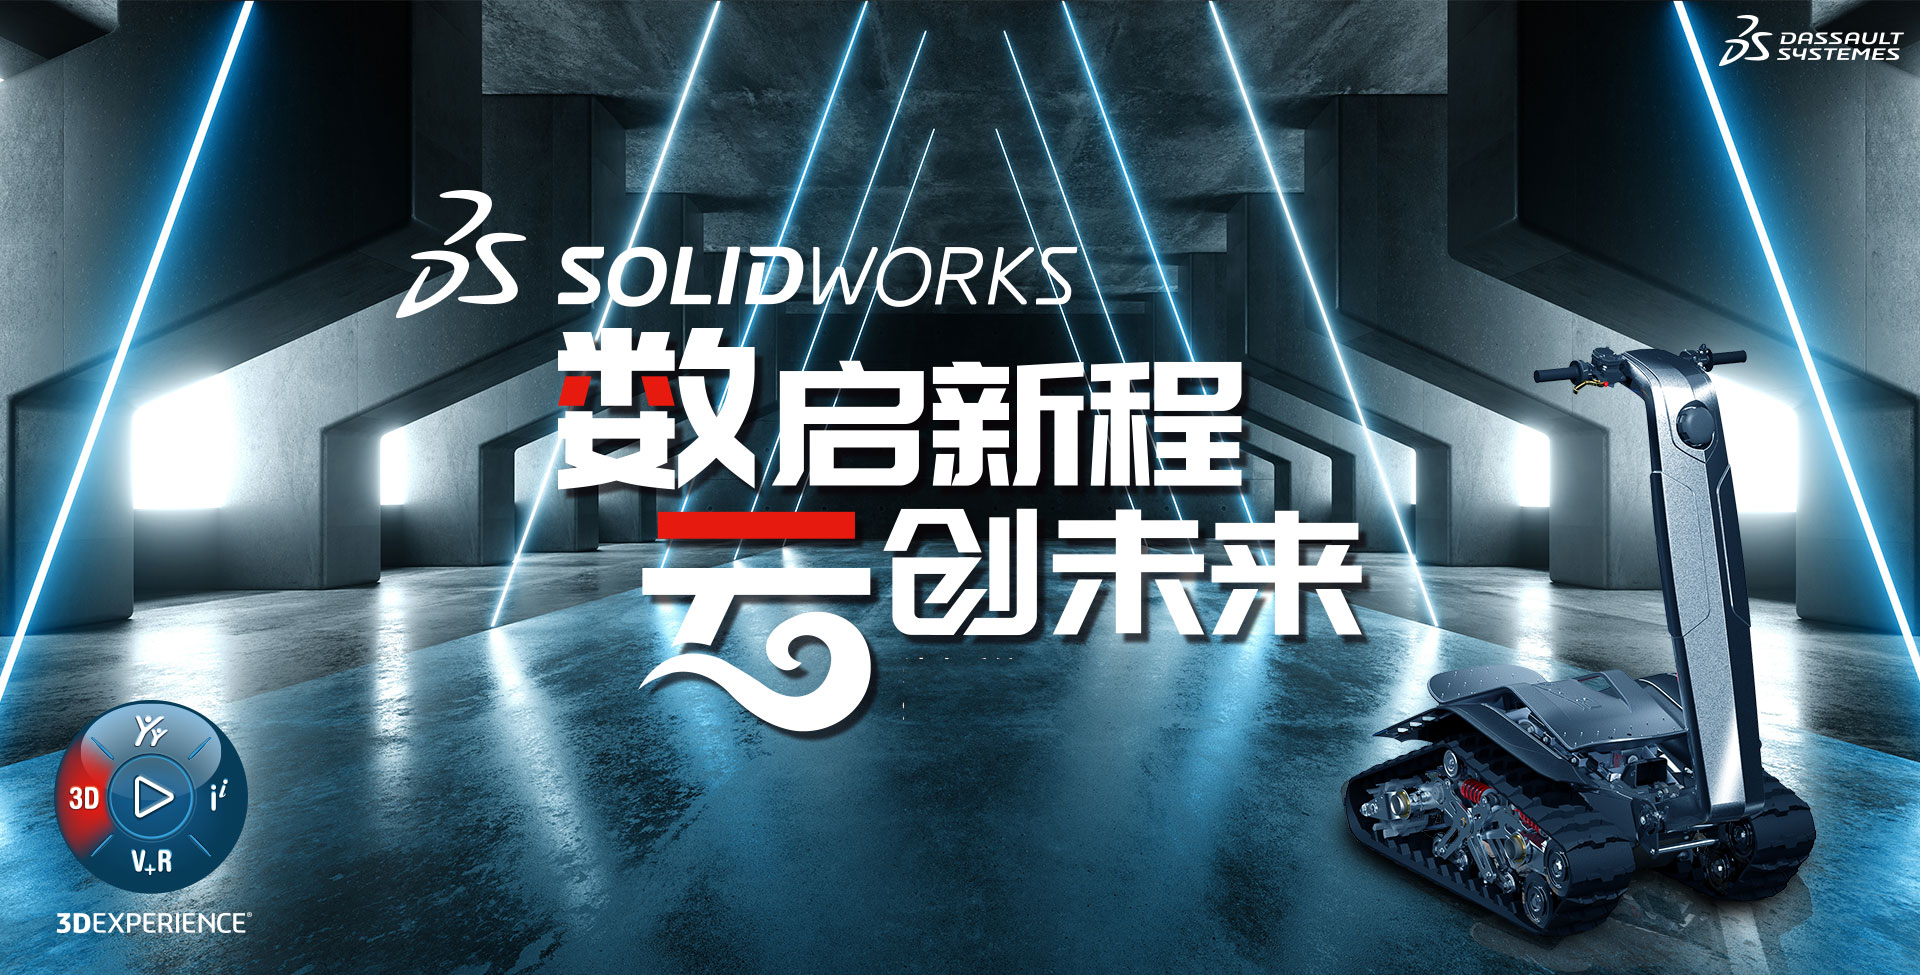 SOLIDWORKS 2023 新功能介绍